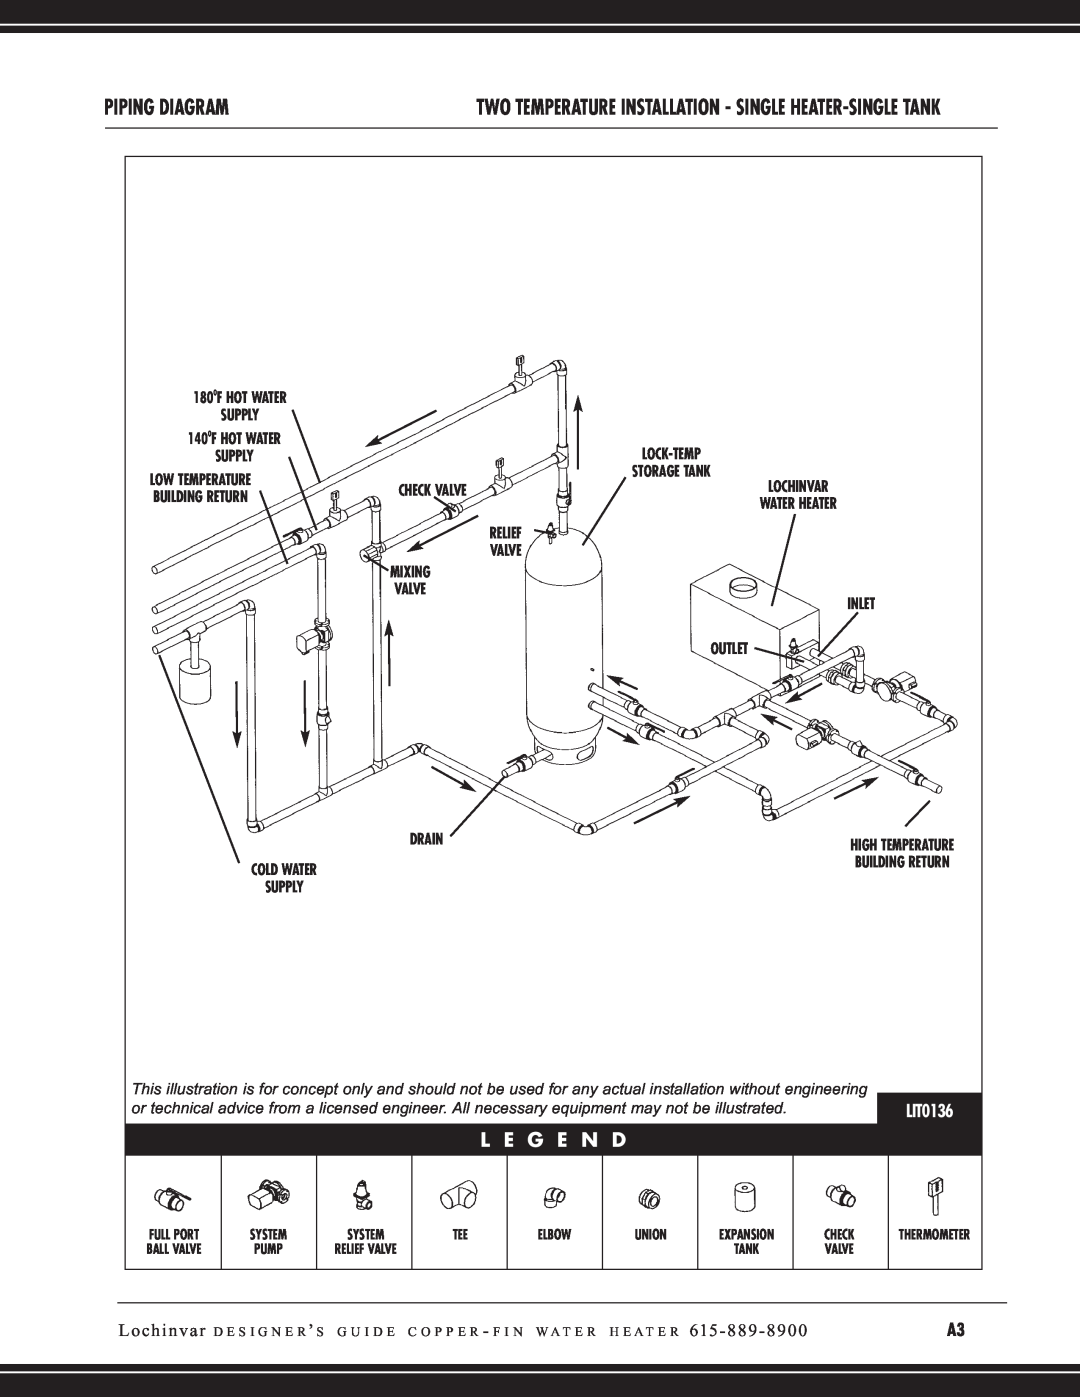 Lochinvar CW 645, CW 745 manual Piping Diagram, L E G E N D, Check Valve, Relief Valve Mixing Valve Inlet Outlet, Drain 